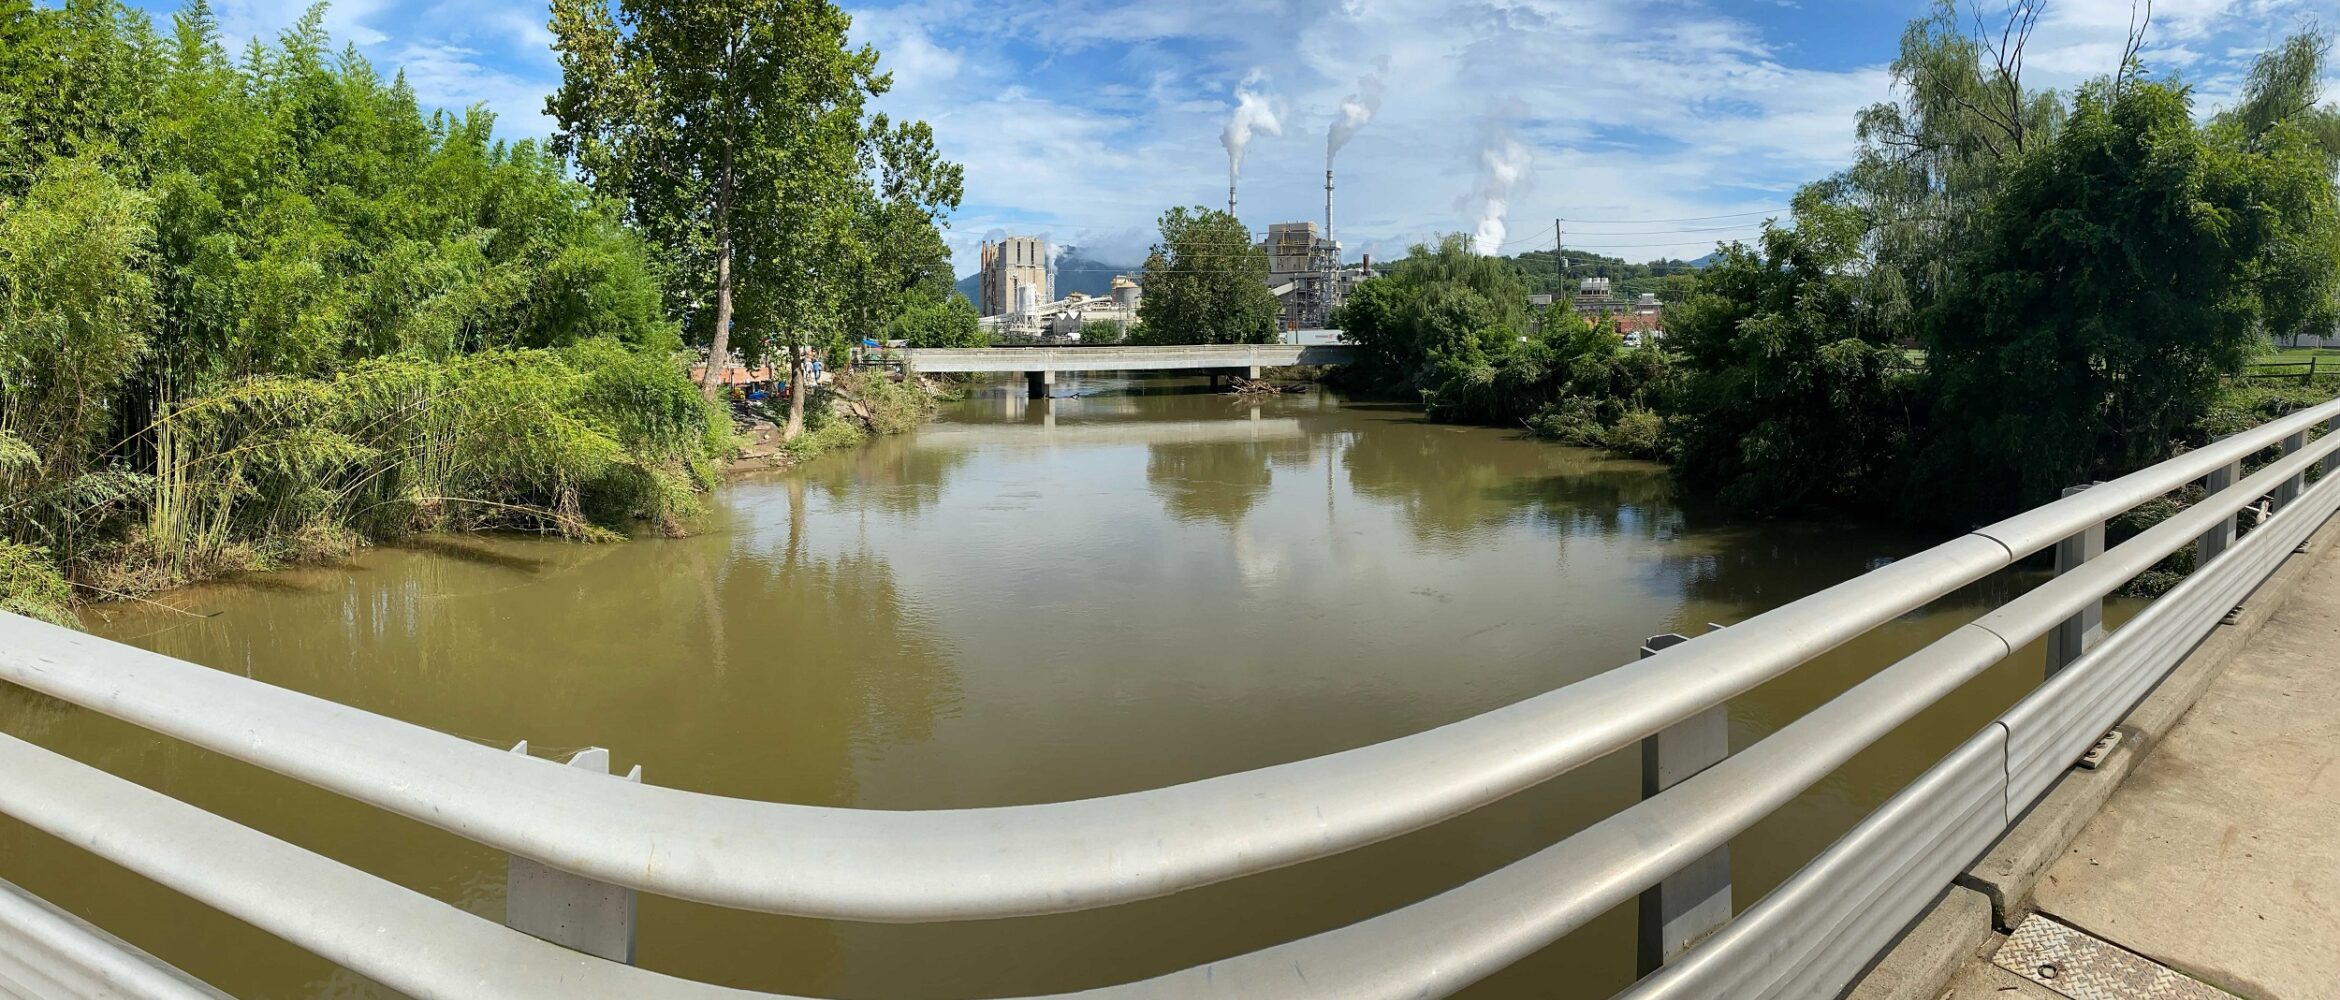 Panoramic view of a flooded river from a bridge with factories visible in the background